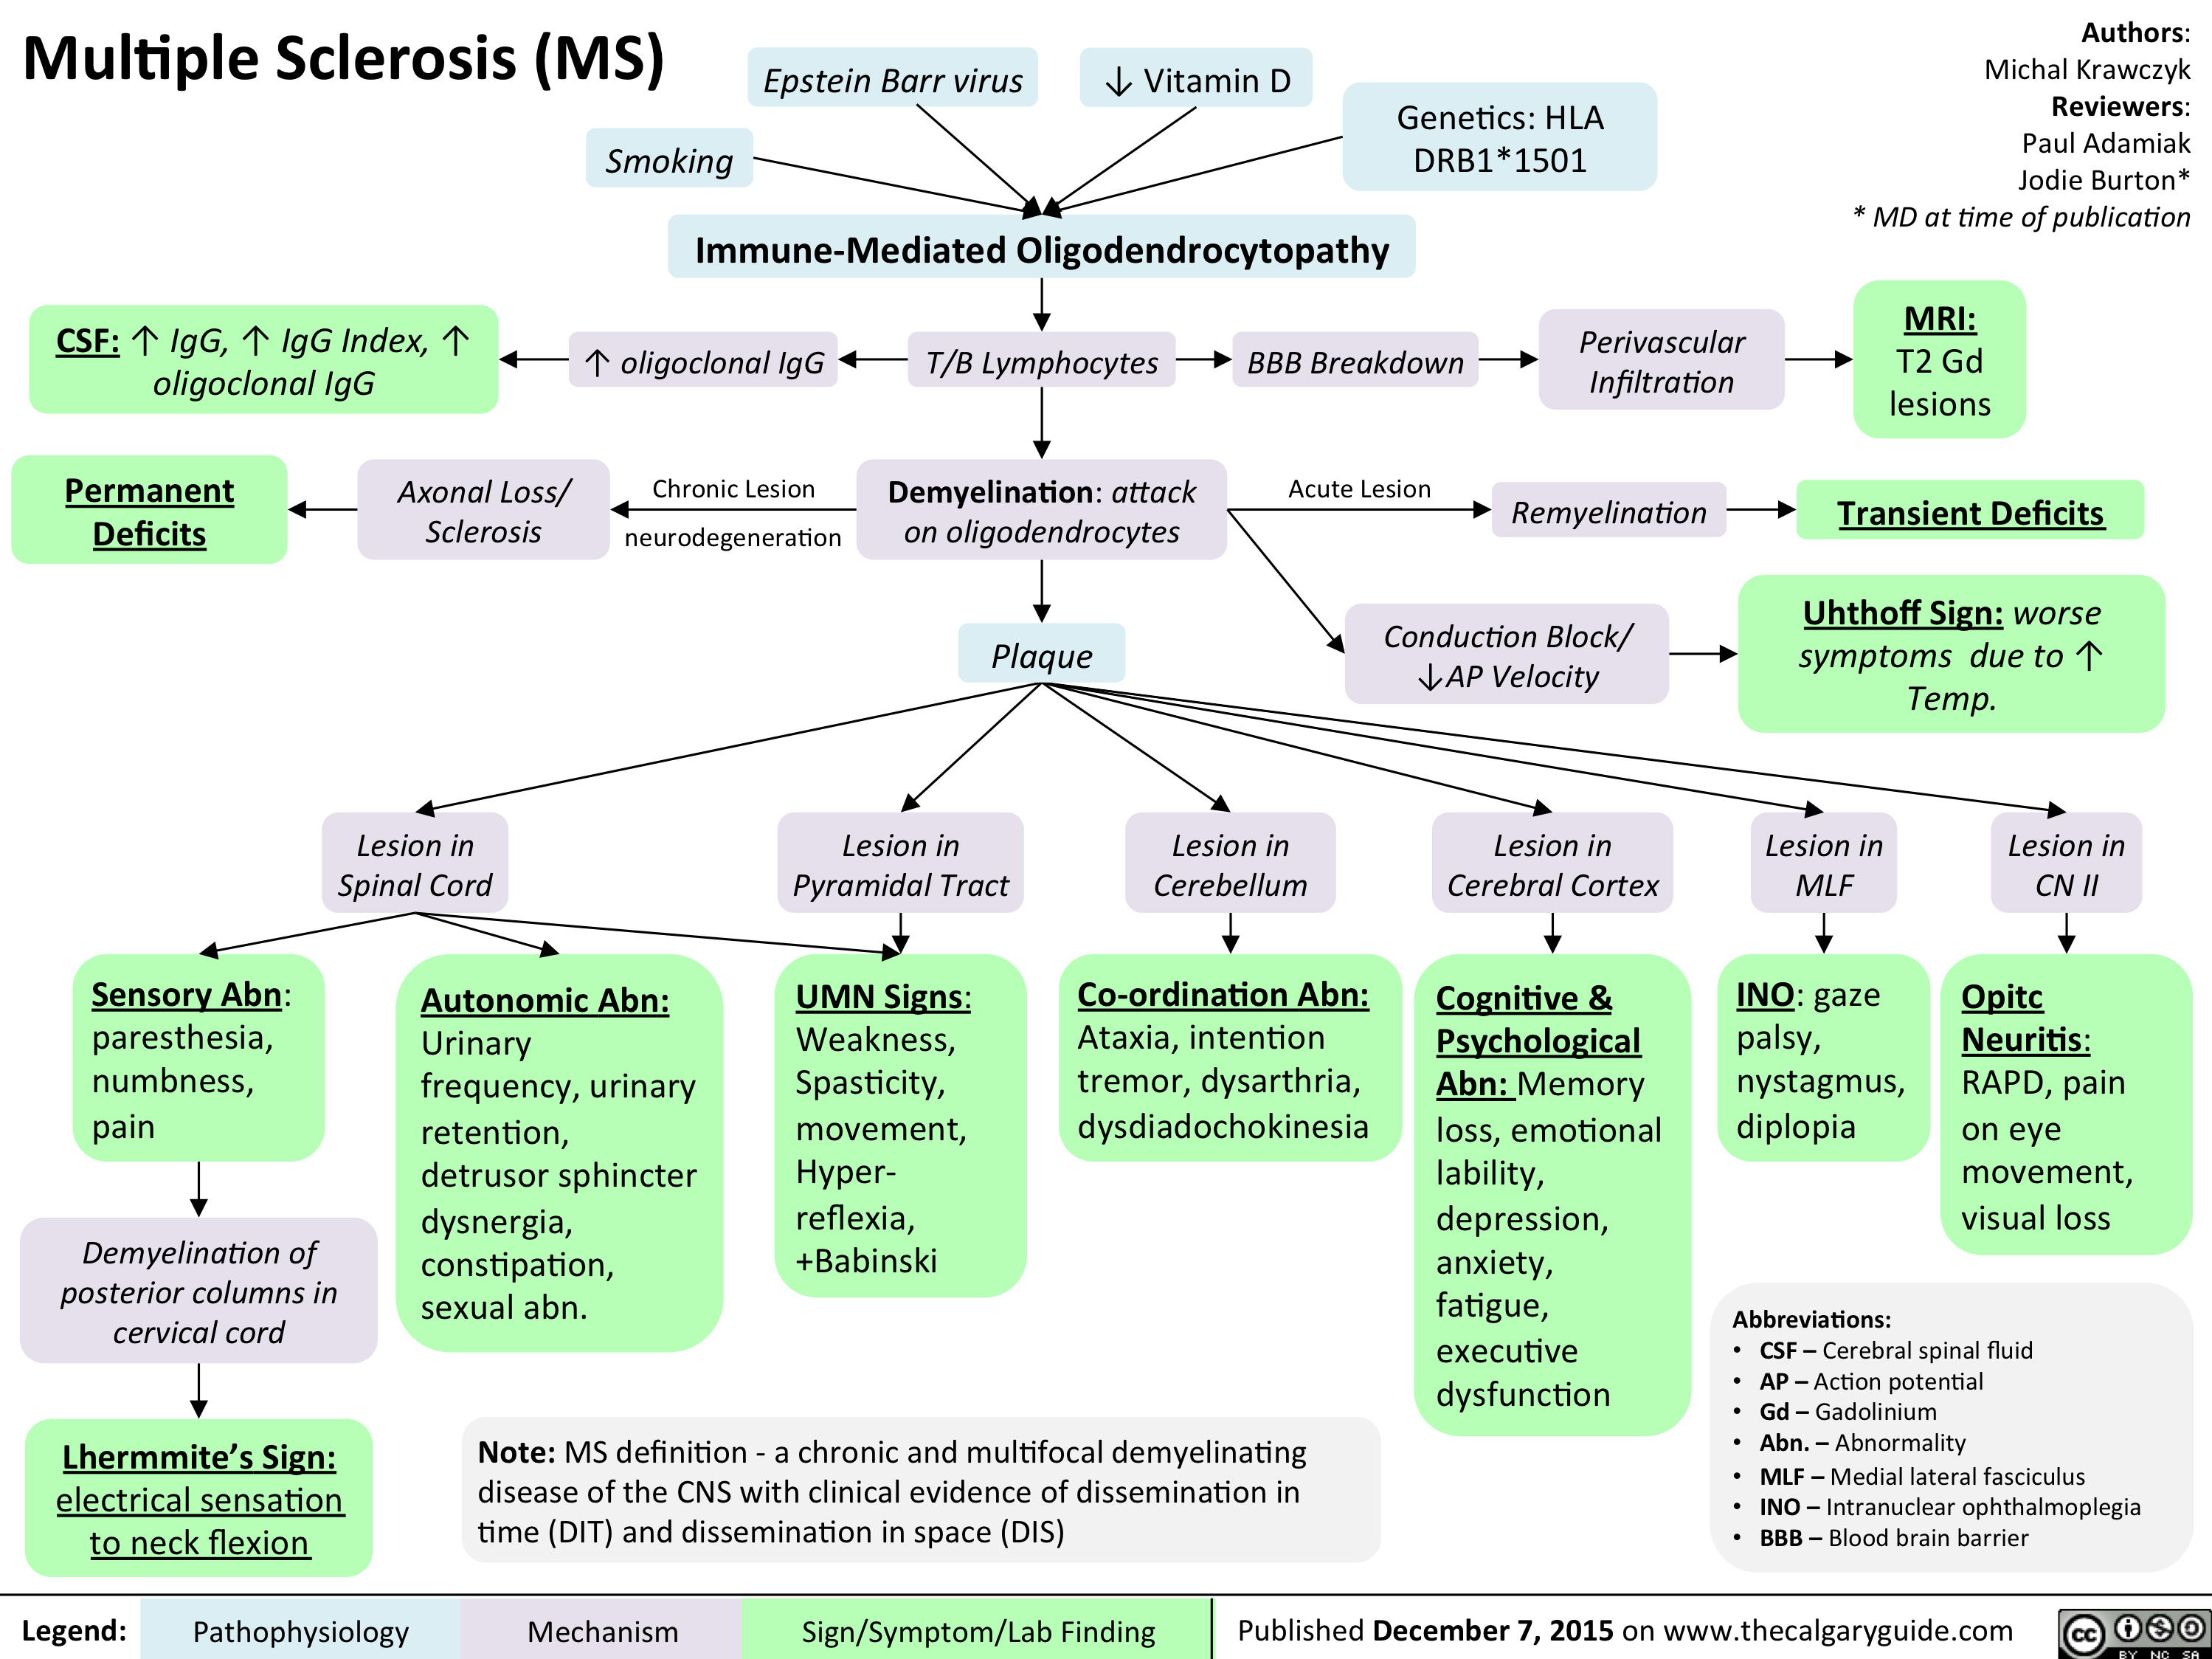 Multiple sclerosis (MS)